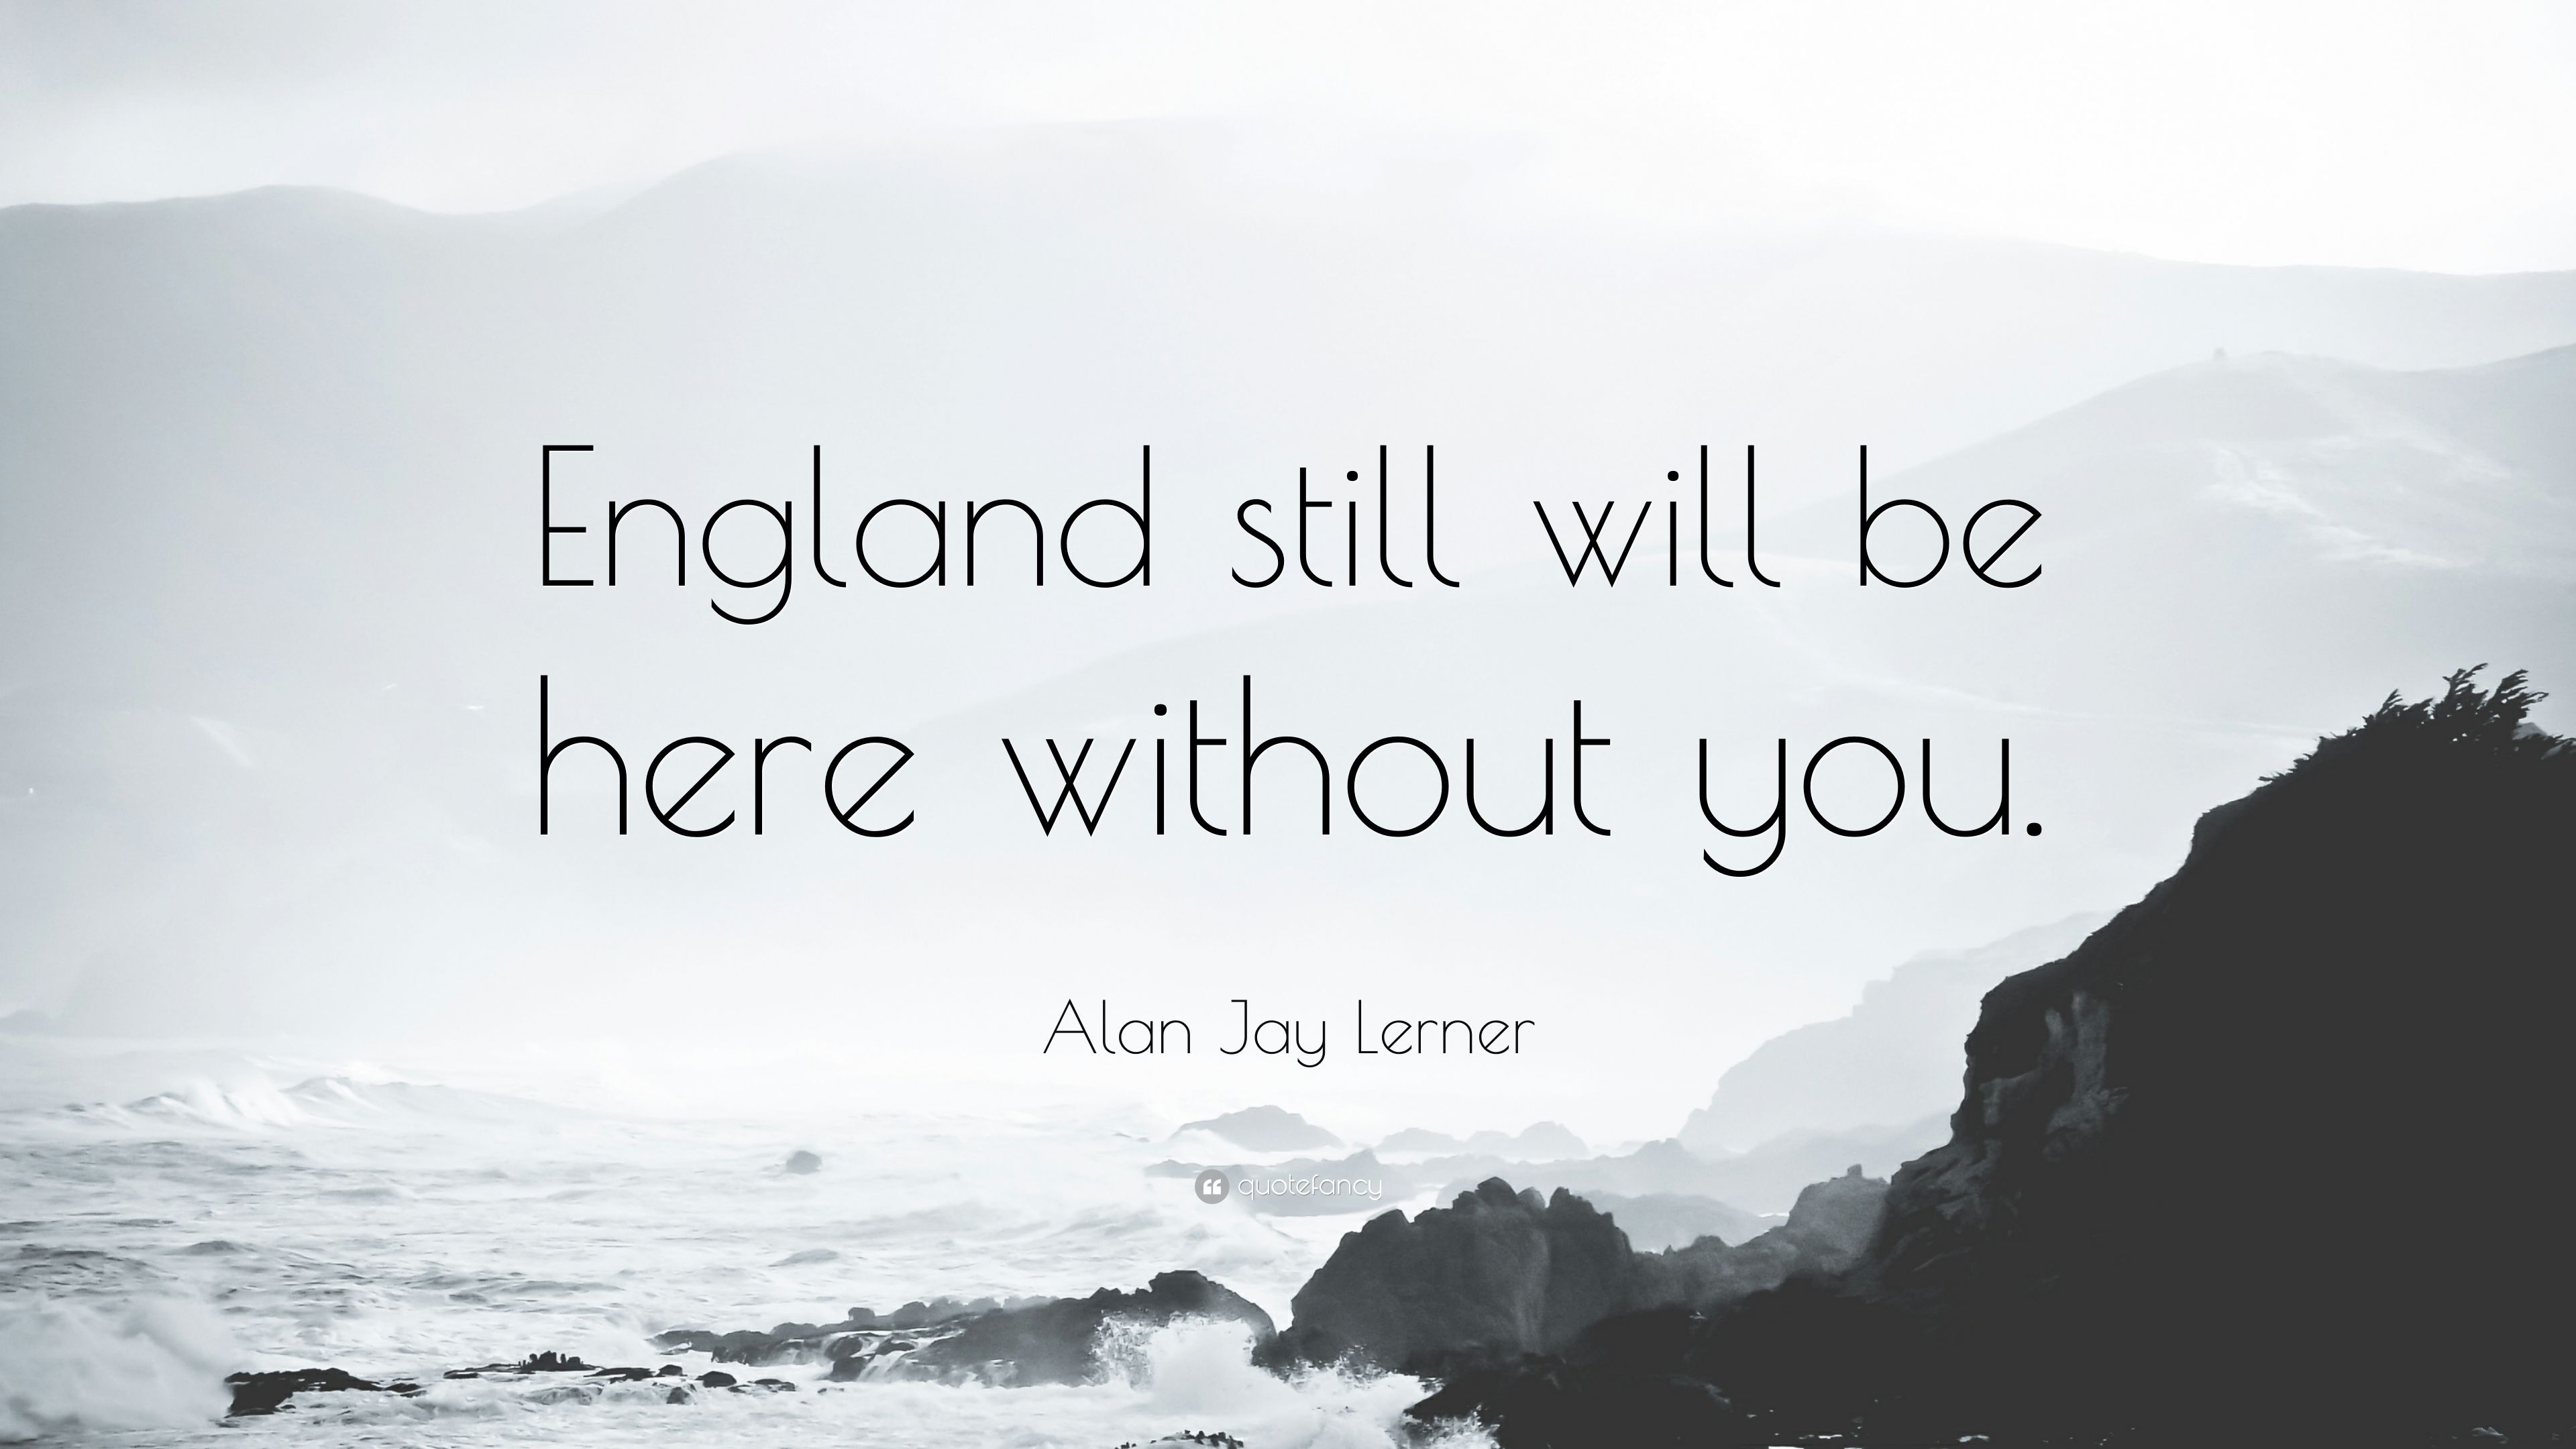 Alan Jay Lerner Quote: “England still will be here without you.” (7 wallpaper)